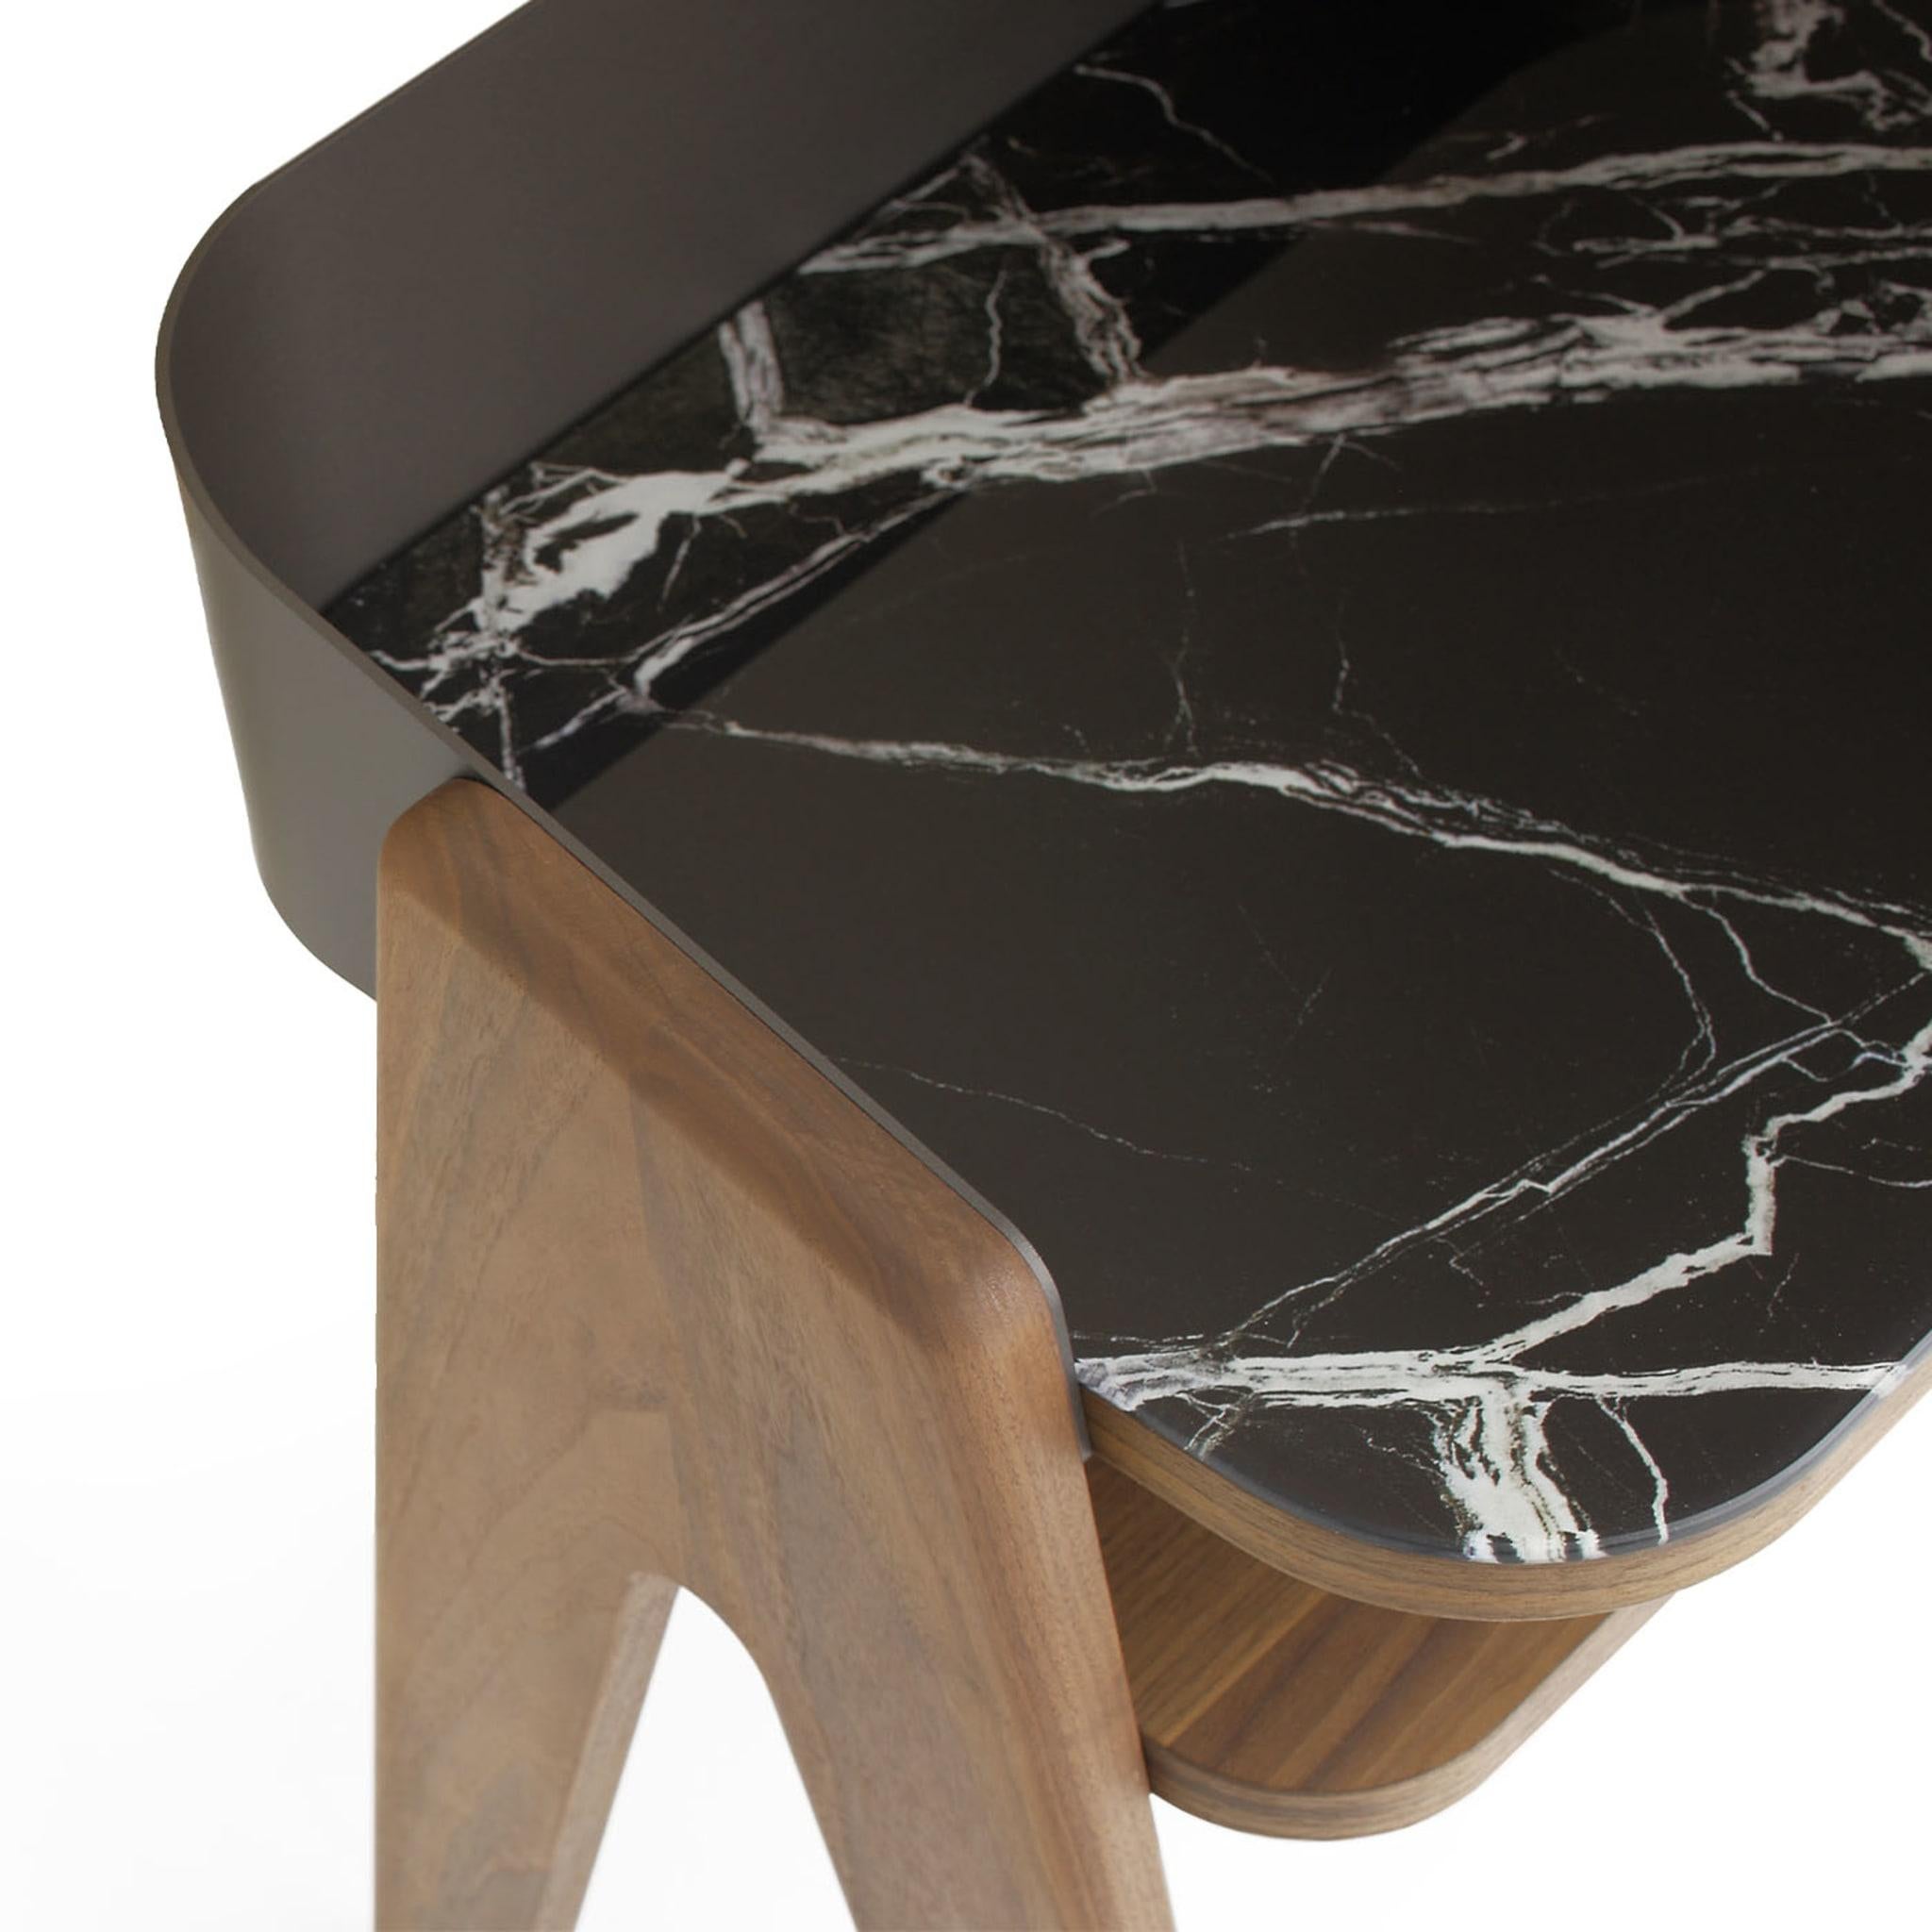 Ideally combined with its desk counterpart for an exclusive cohesive look, this nightstand seduces with its walnut grain and intriguing marbled traceries. The enveloping calendered metal shell - sustained by V-shaped solid Canaletto walnut legs -